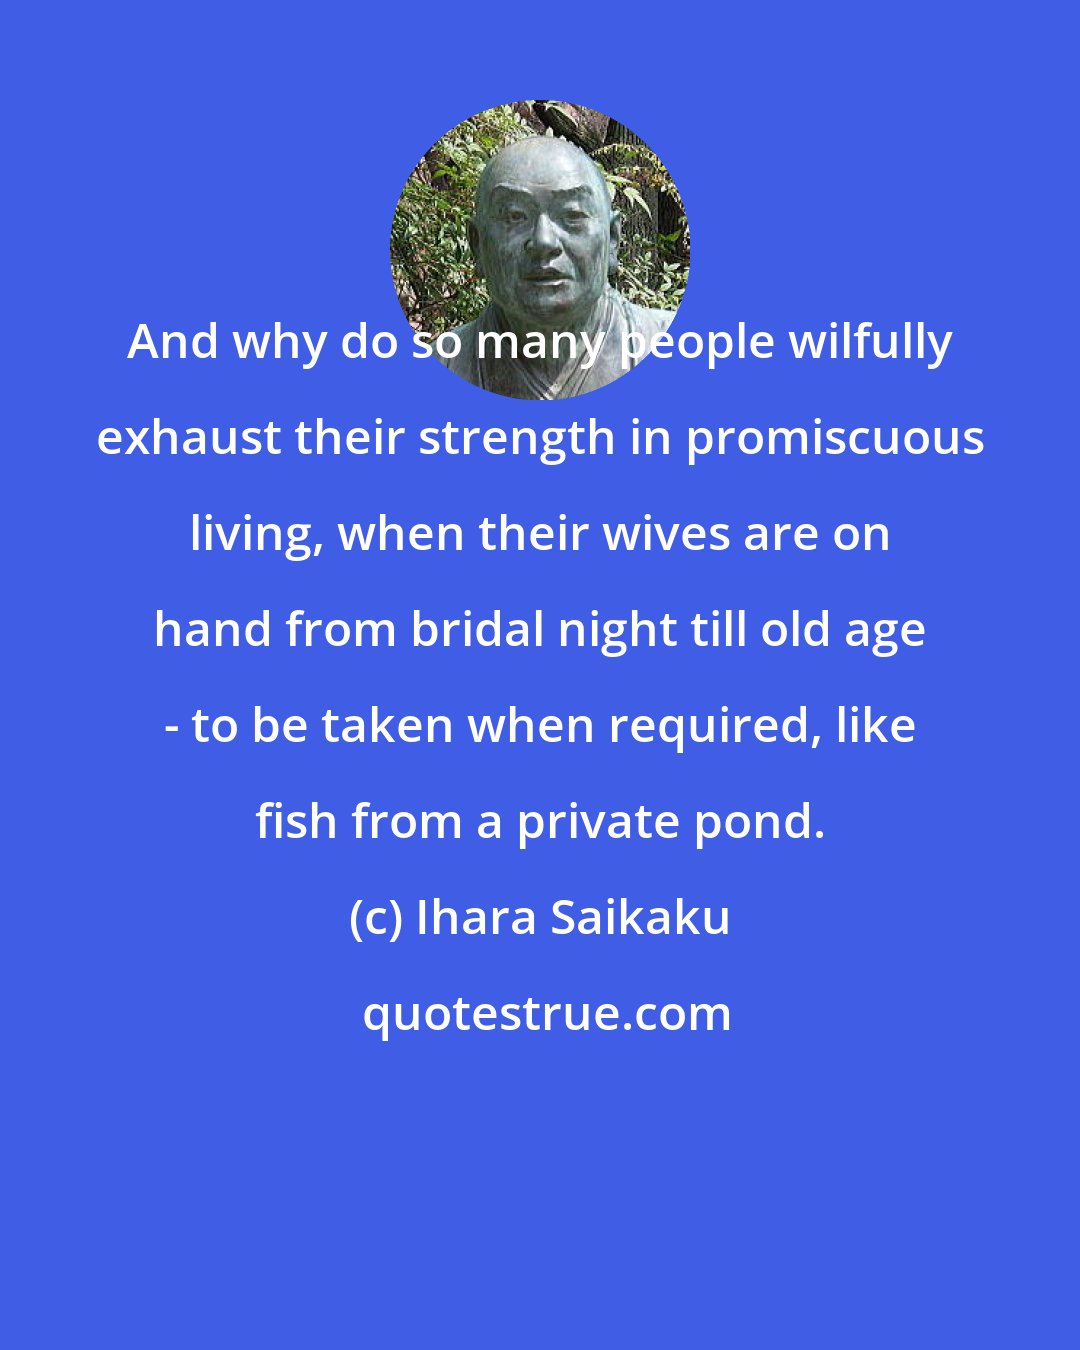 Ihara Saikaku: And why do so many people wilfully exhaust their strength in promiscuous living, when their wives are on hand from bridal night till old age - to be taken when required, like fish from a private pond.